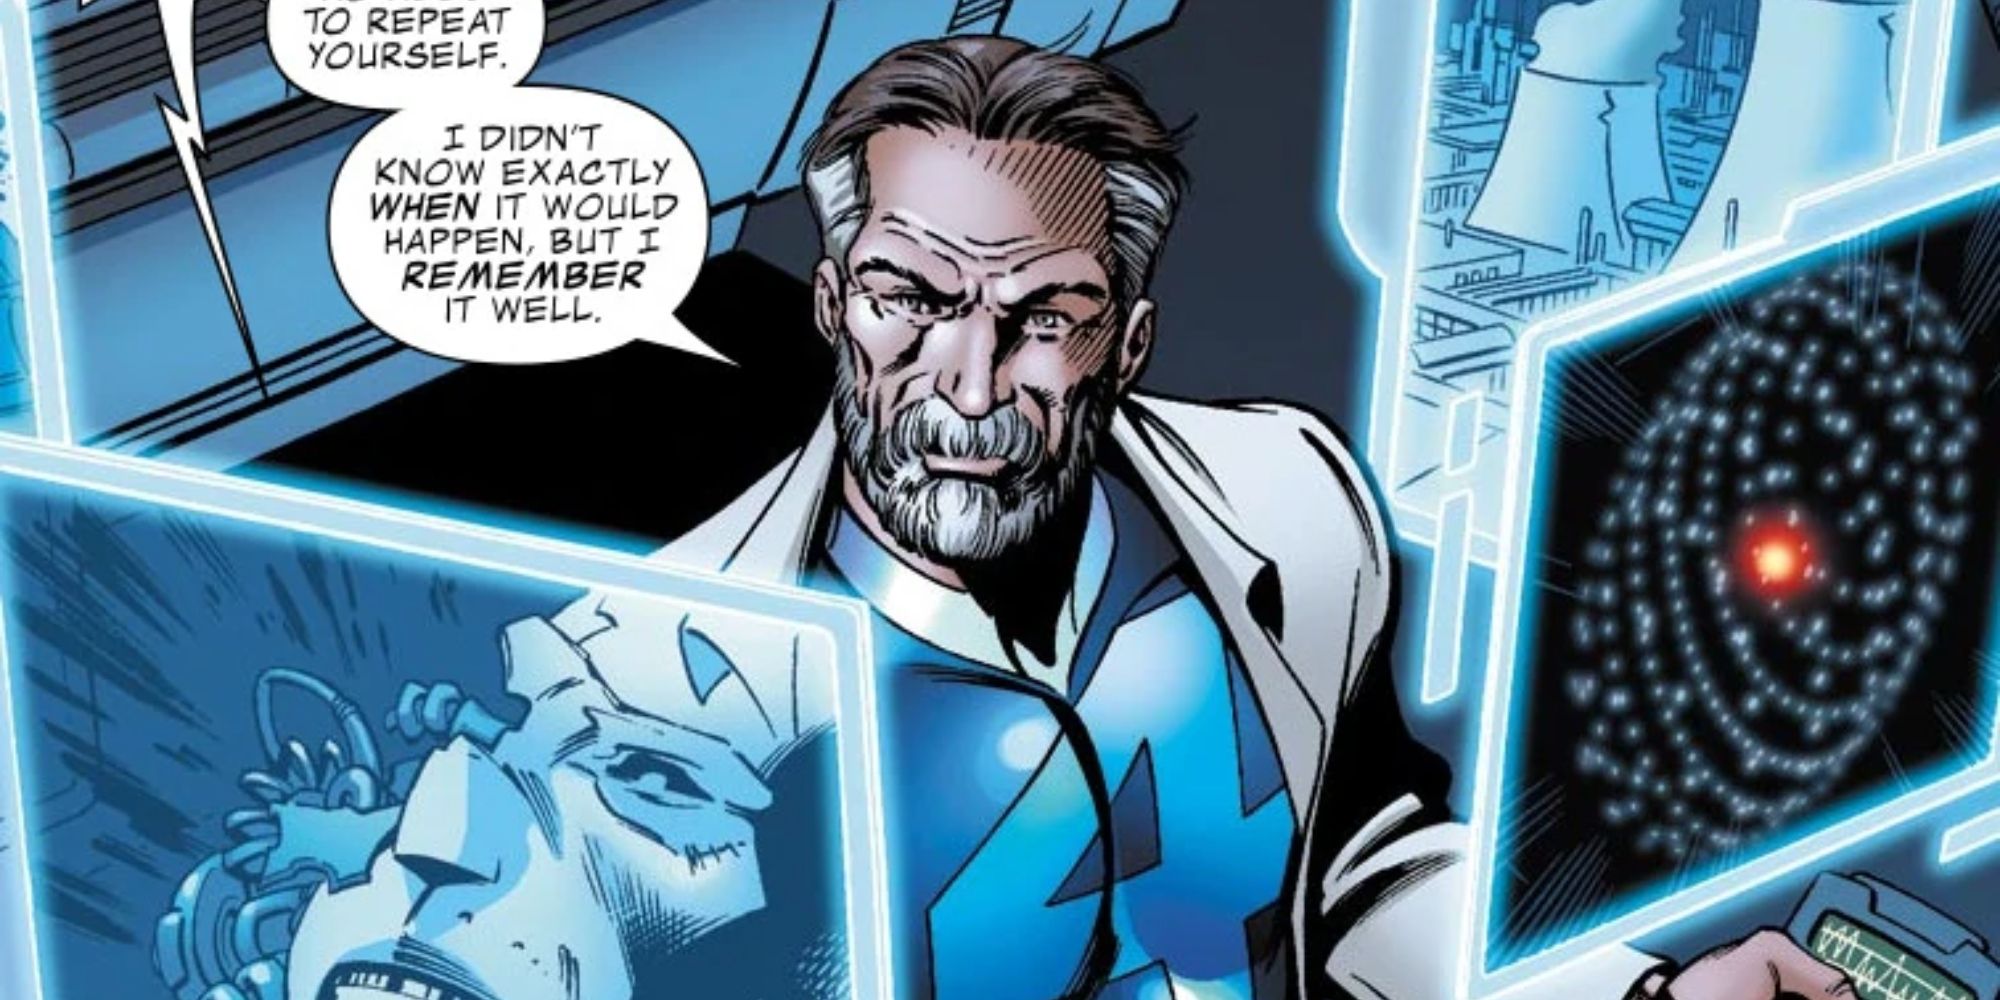 Reed Richards working with holograms in the comics